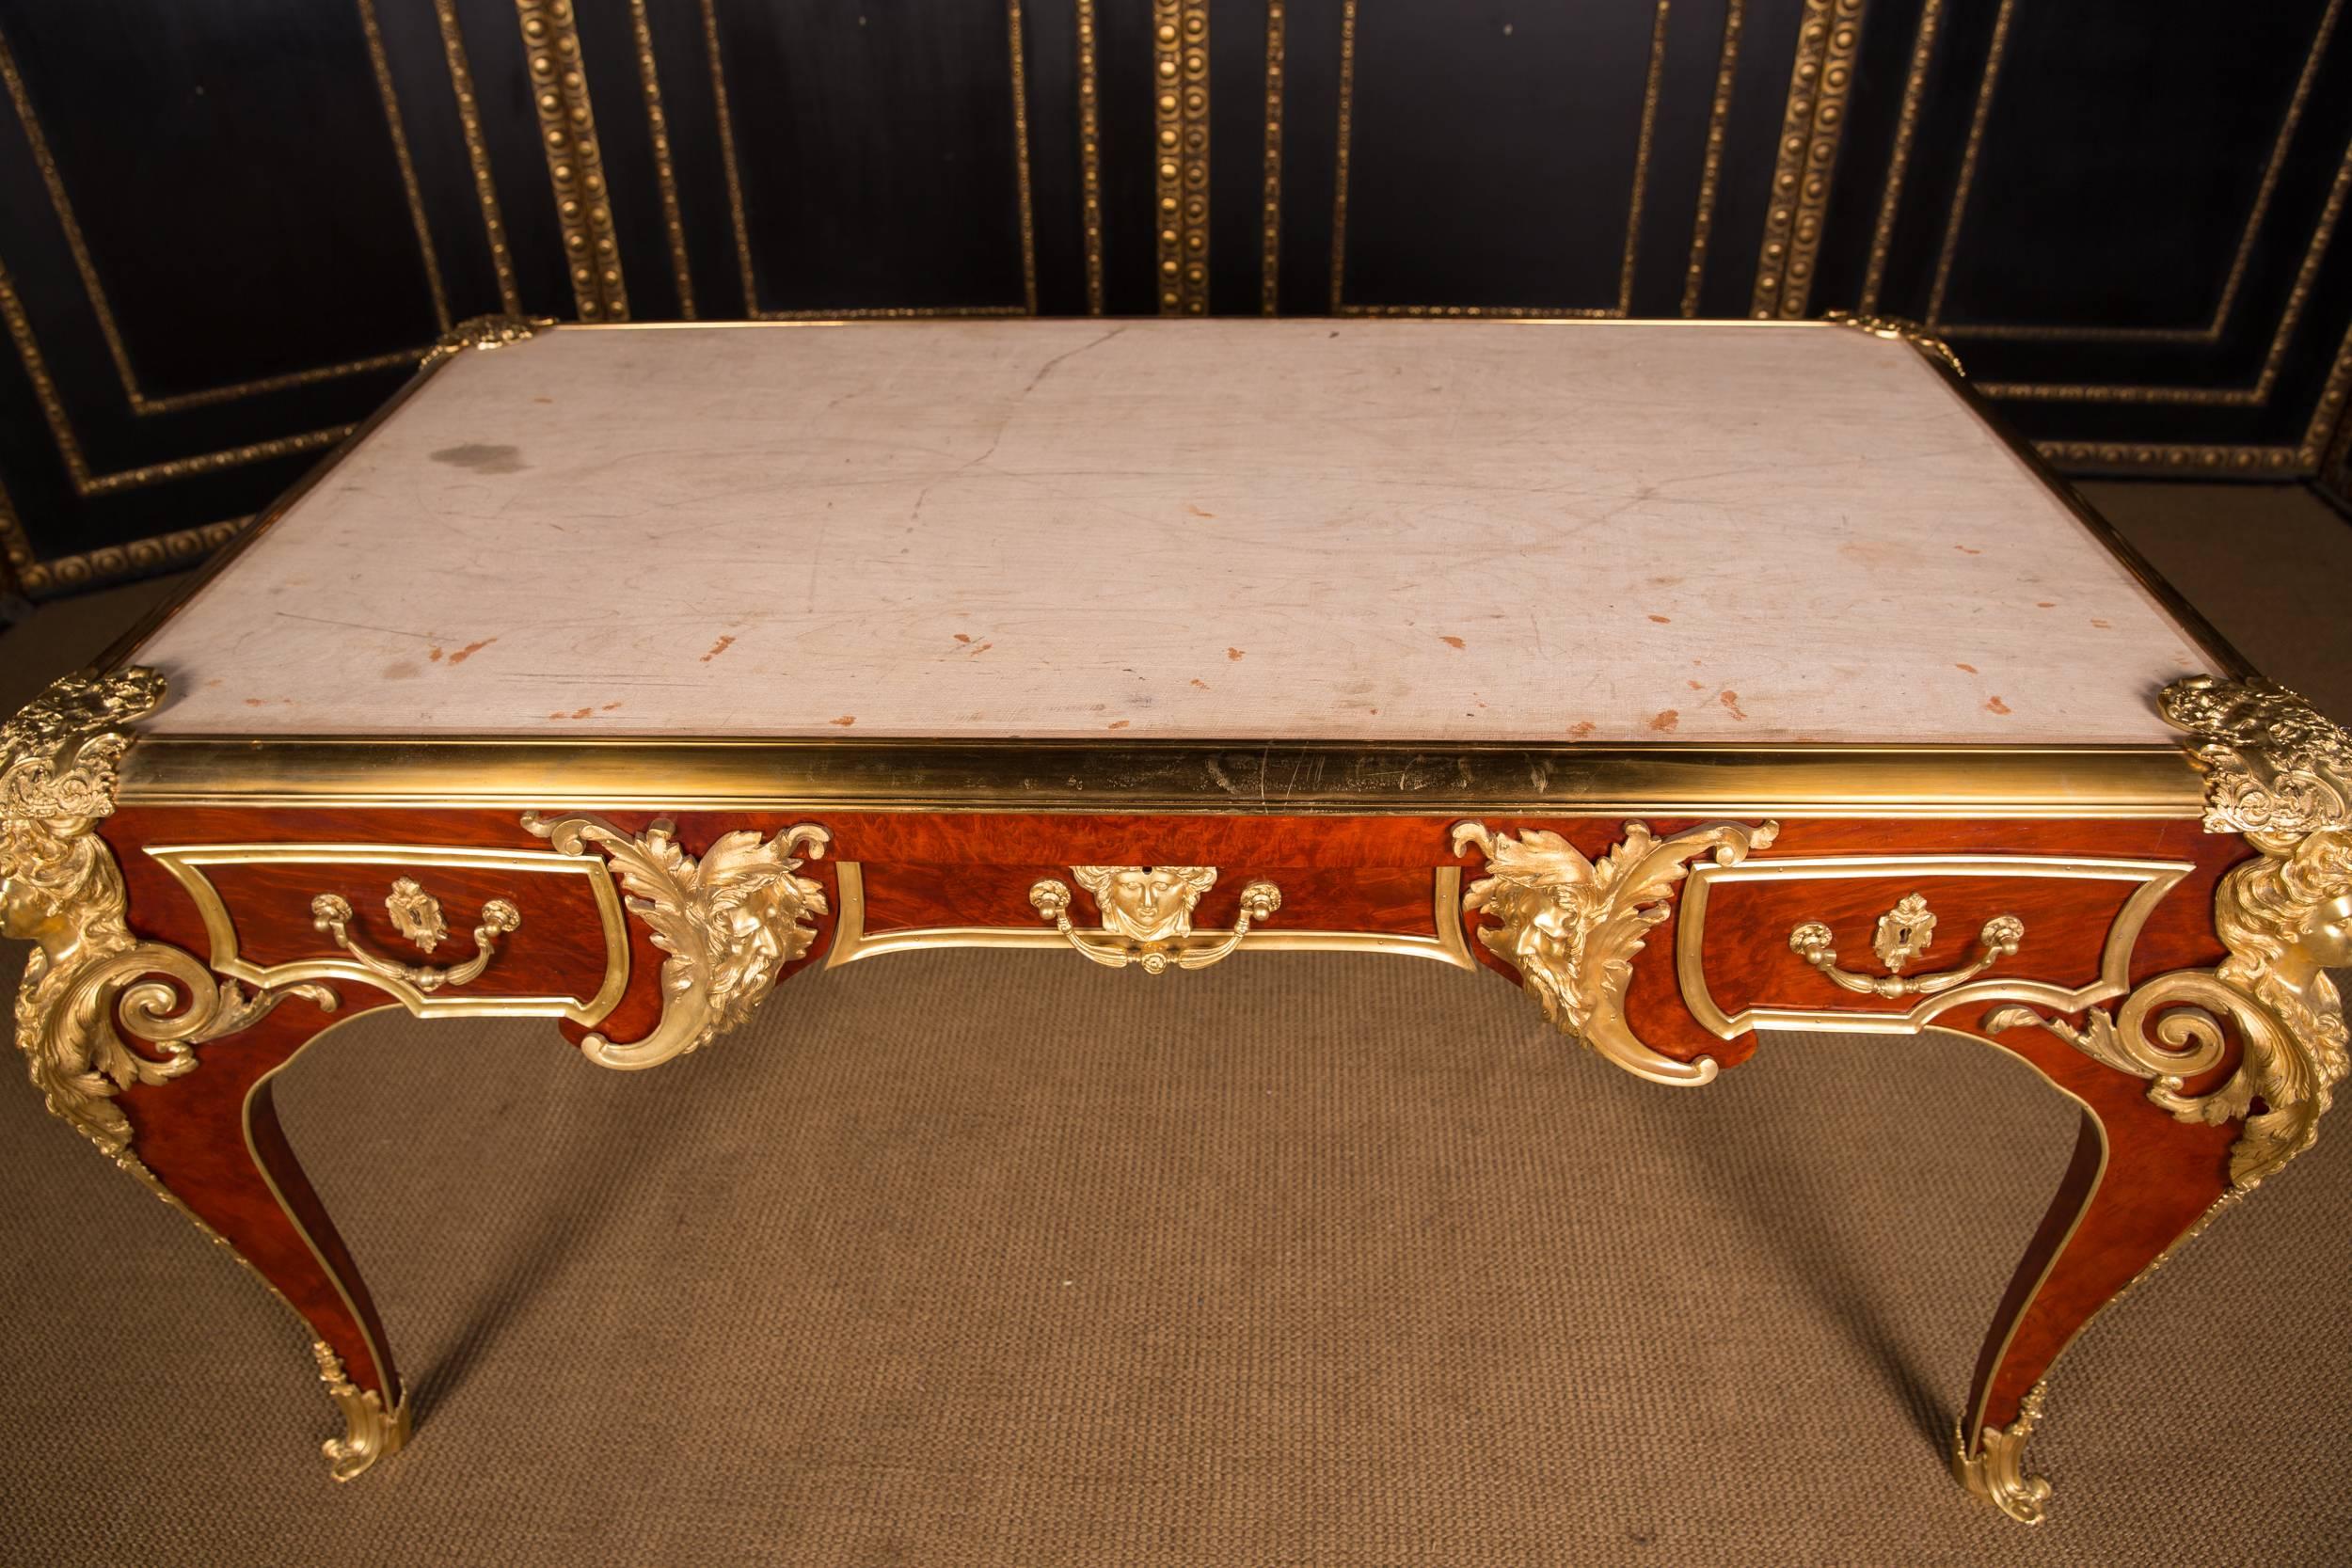 Louis XV Majestic French Bureau Plat Desk According to Andre C. Boulle